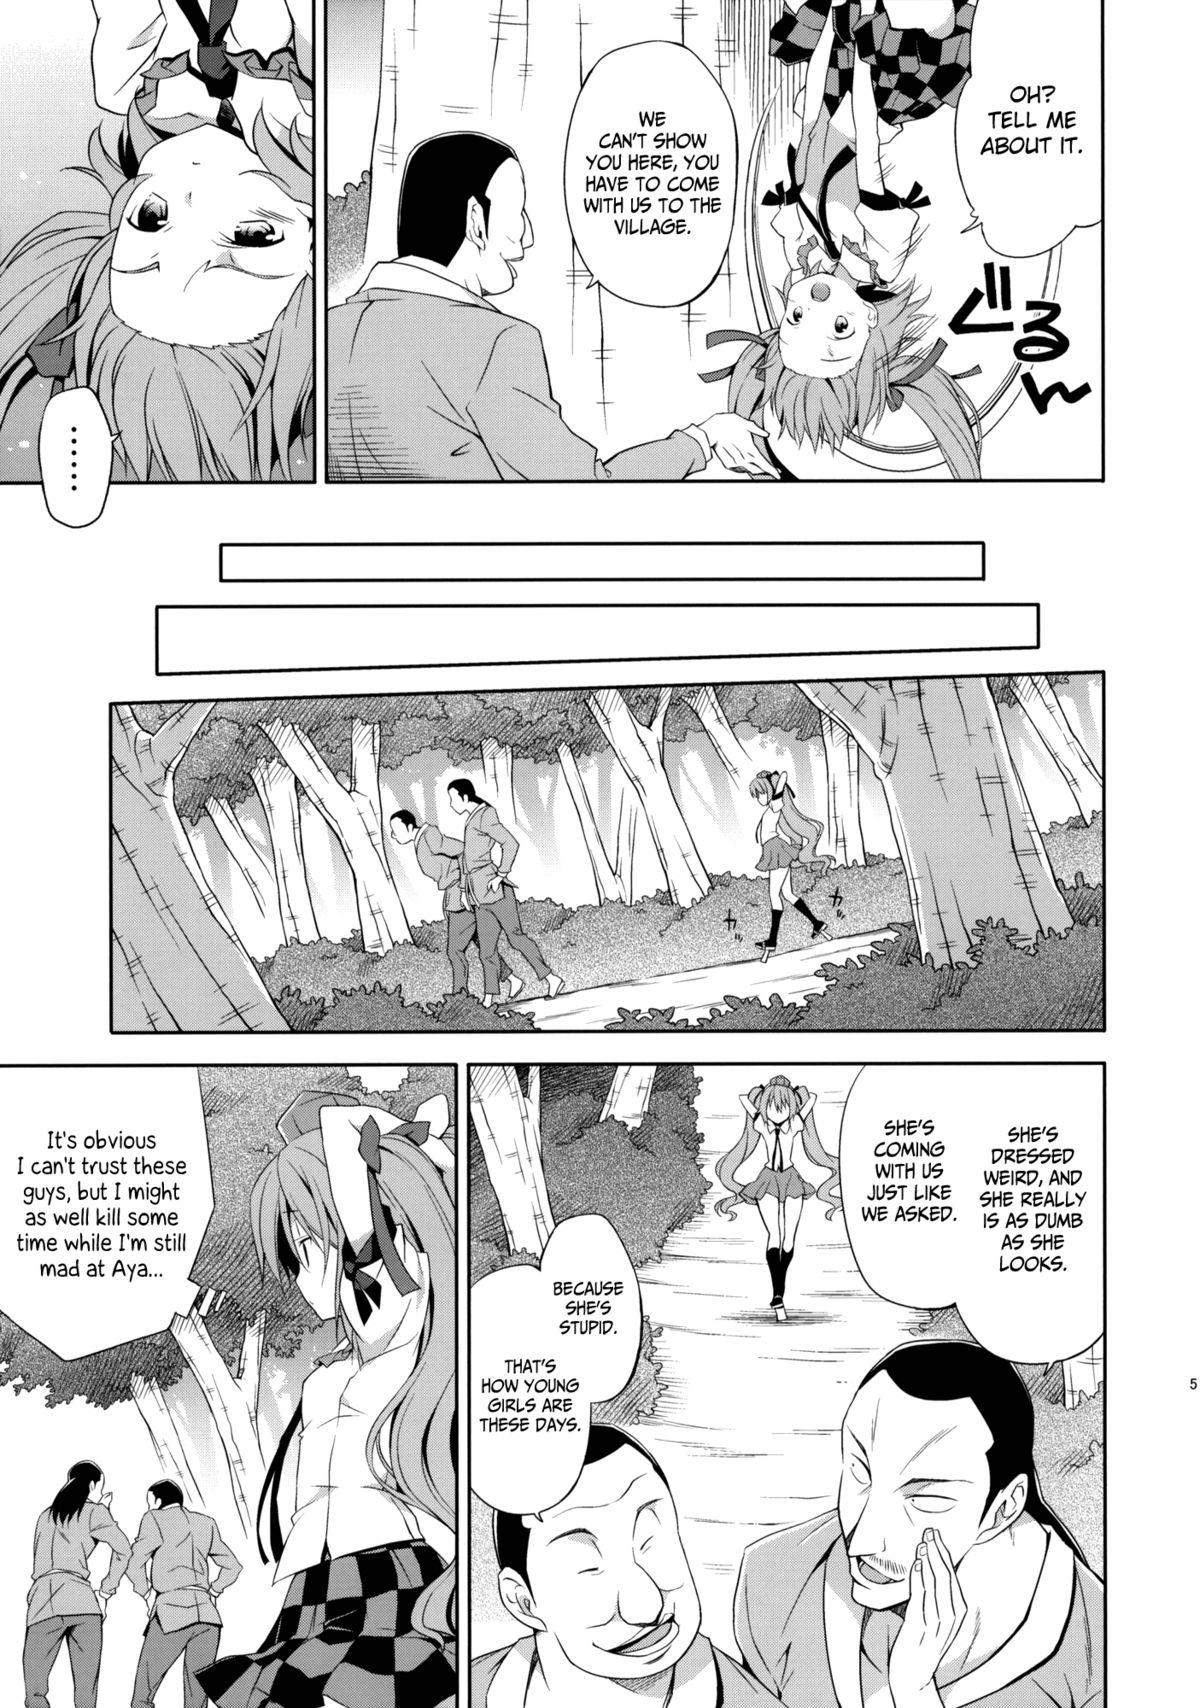 Assfuck Hatate no Binwan Shuzairoku | Record of Hatate's Competent Fact-Finding - Touhou project Real Orgasms - Page 4